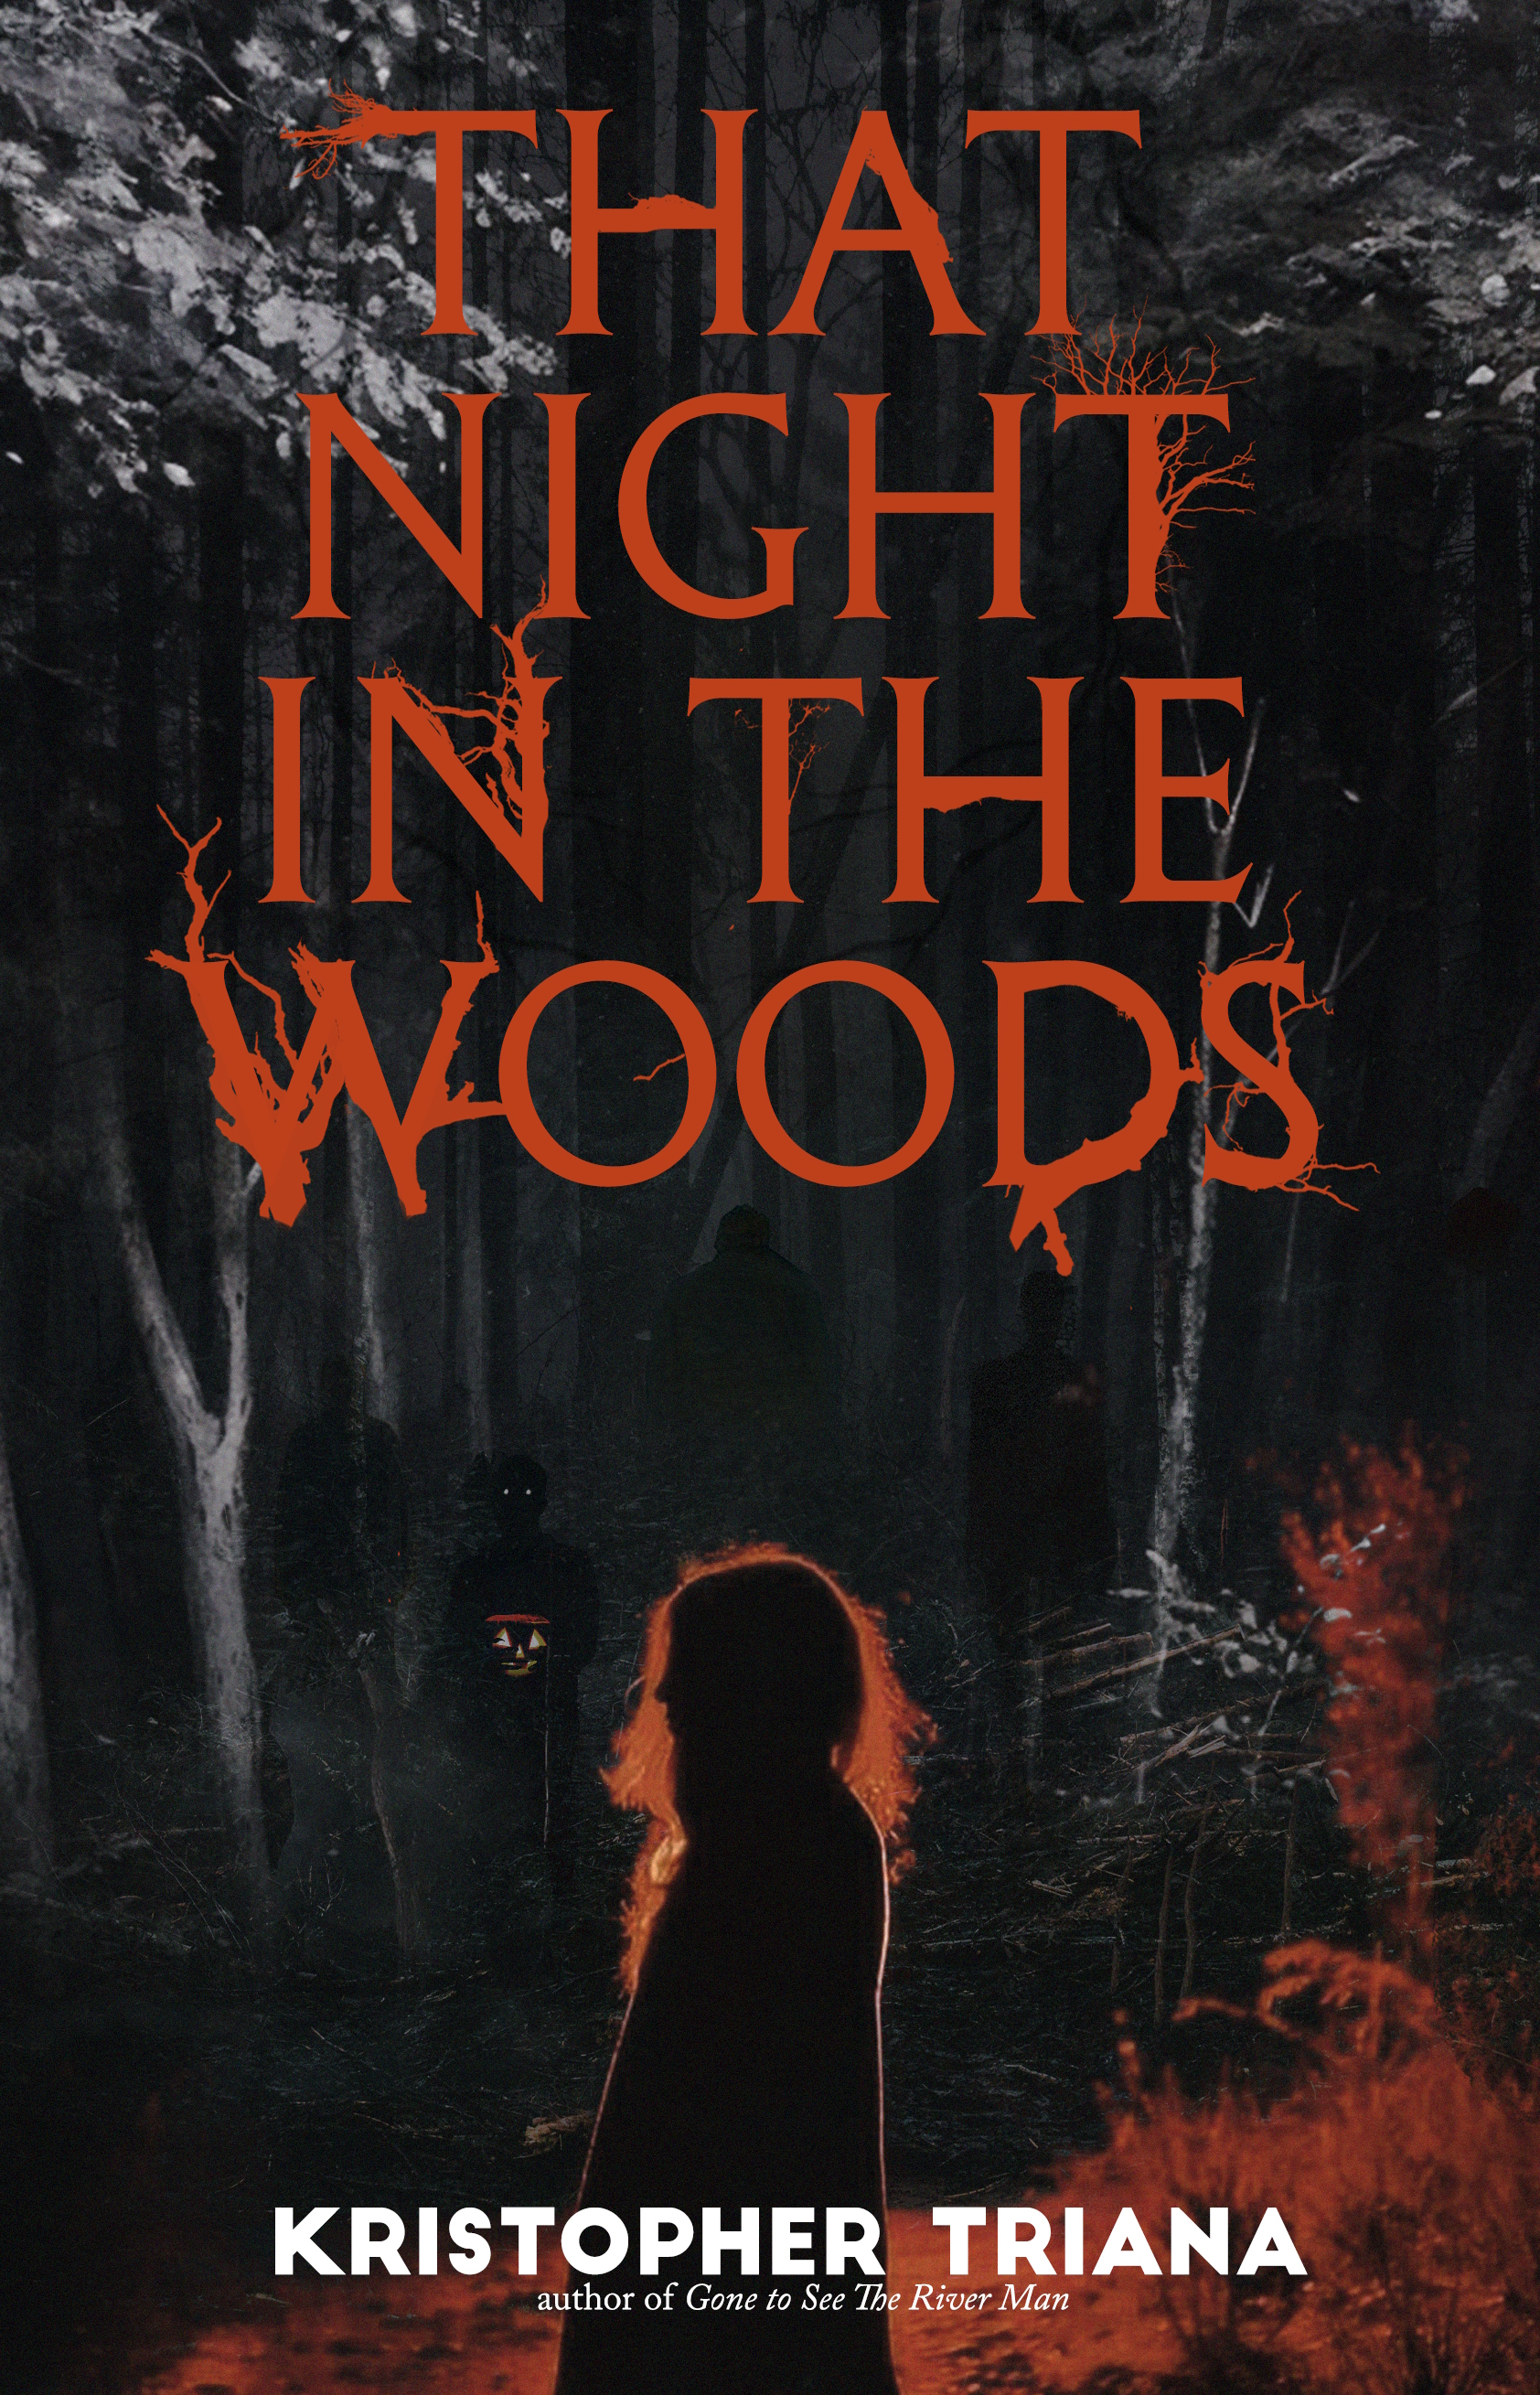 That Night in the Woods, by Kristopher Triana